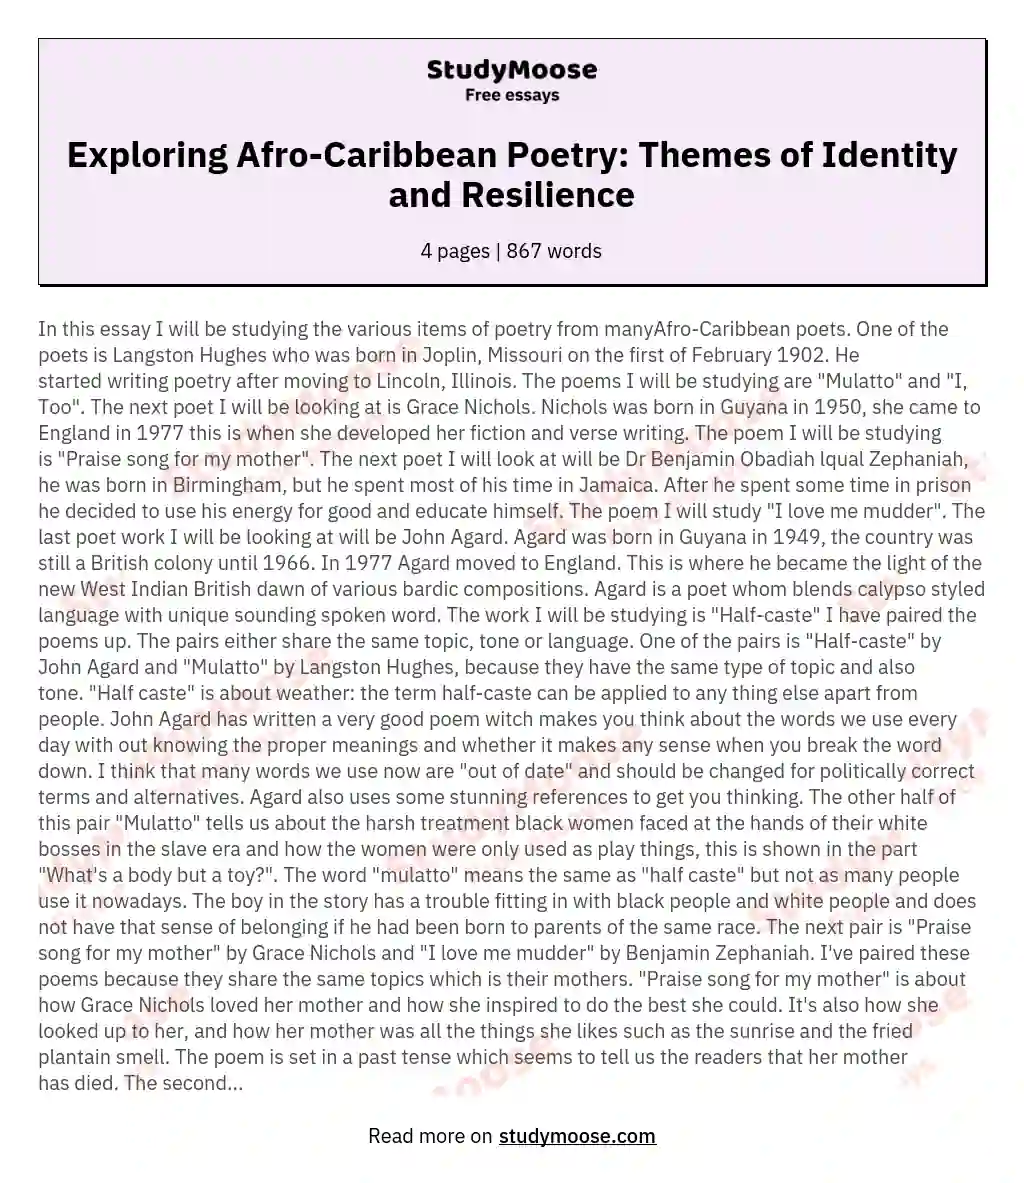 Exploring Afro-Caribbean Poetry: Themes of Identity and Resilience essay